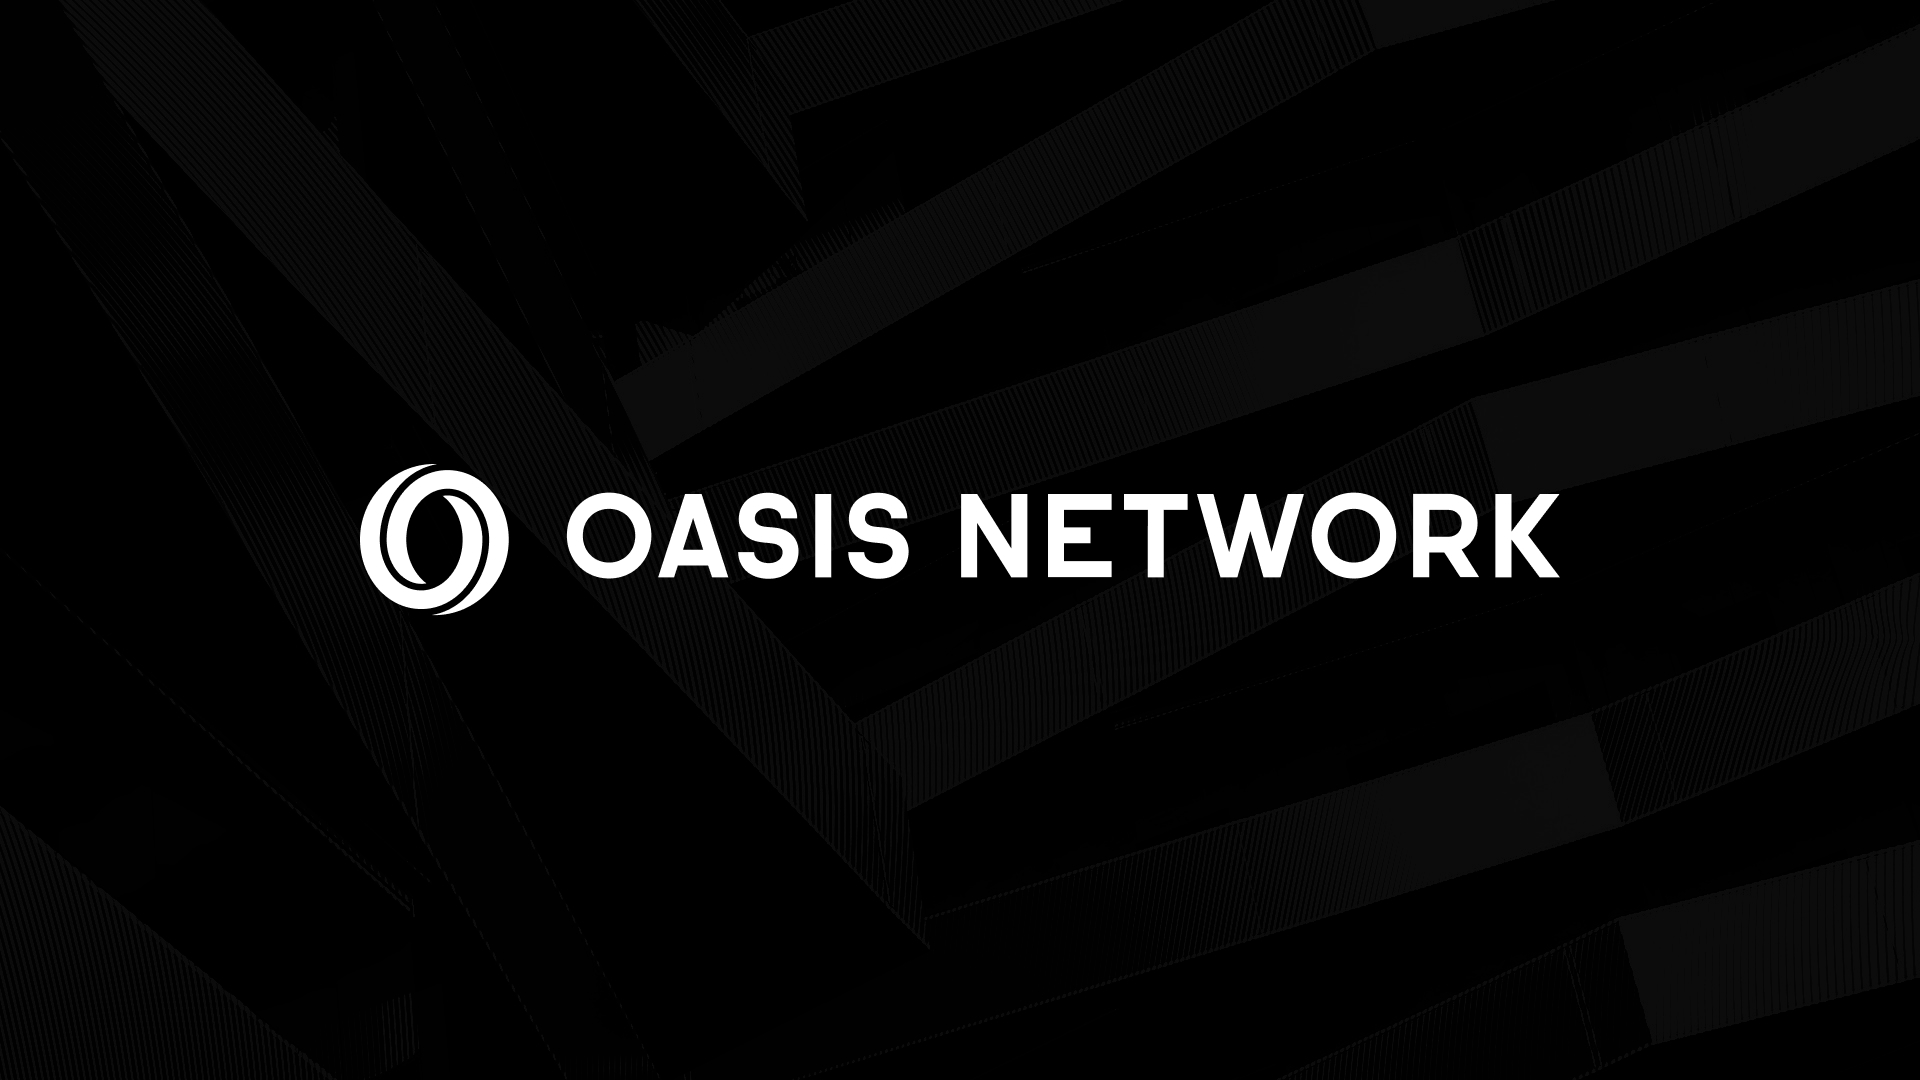 Oasis Network Launches Sapphire Privacy Blockchain $ROSE